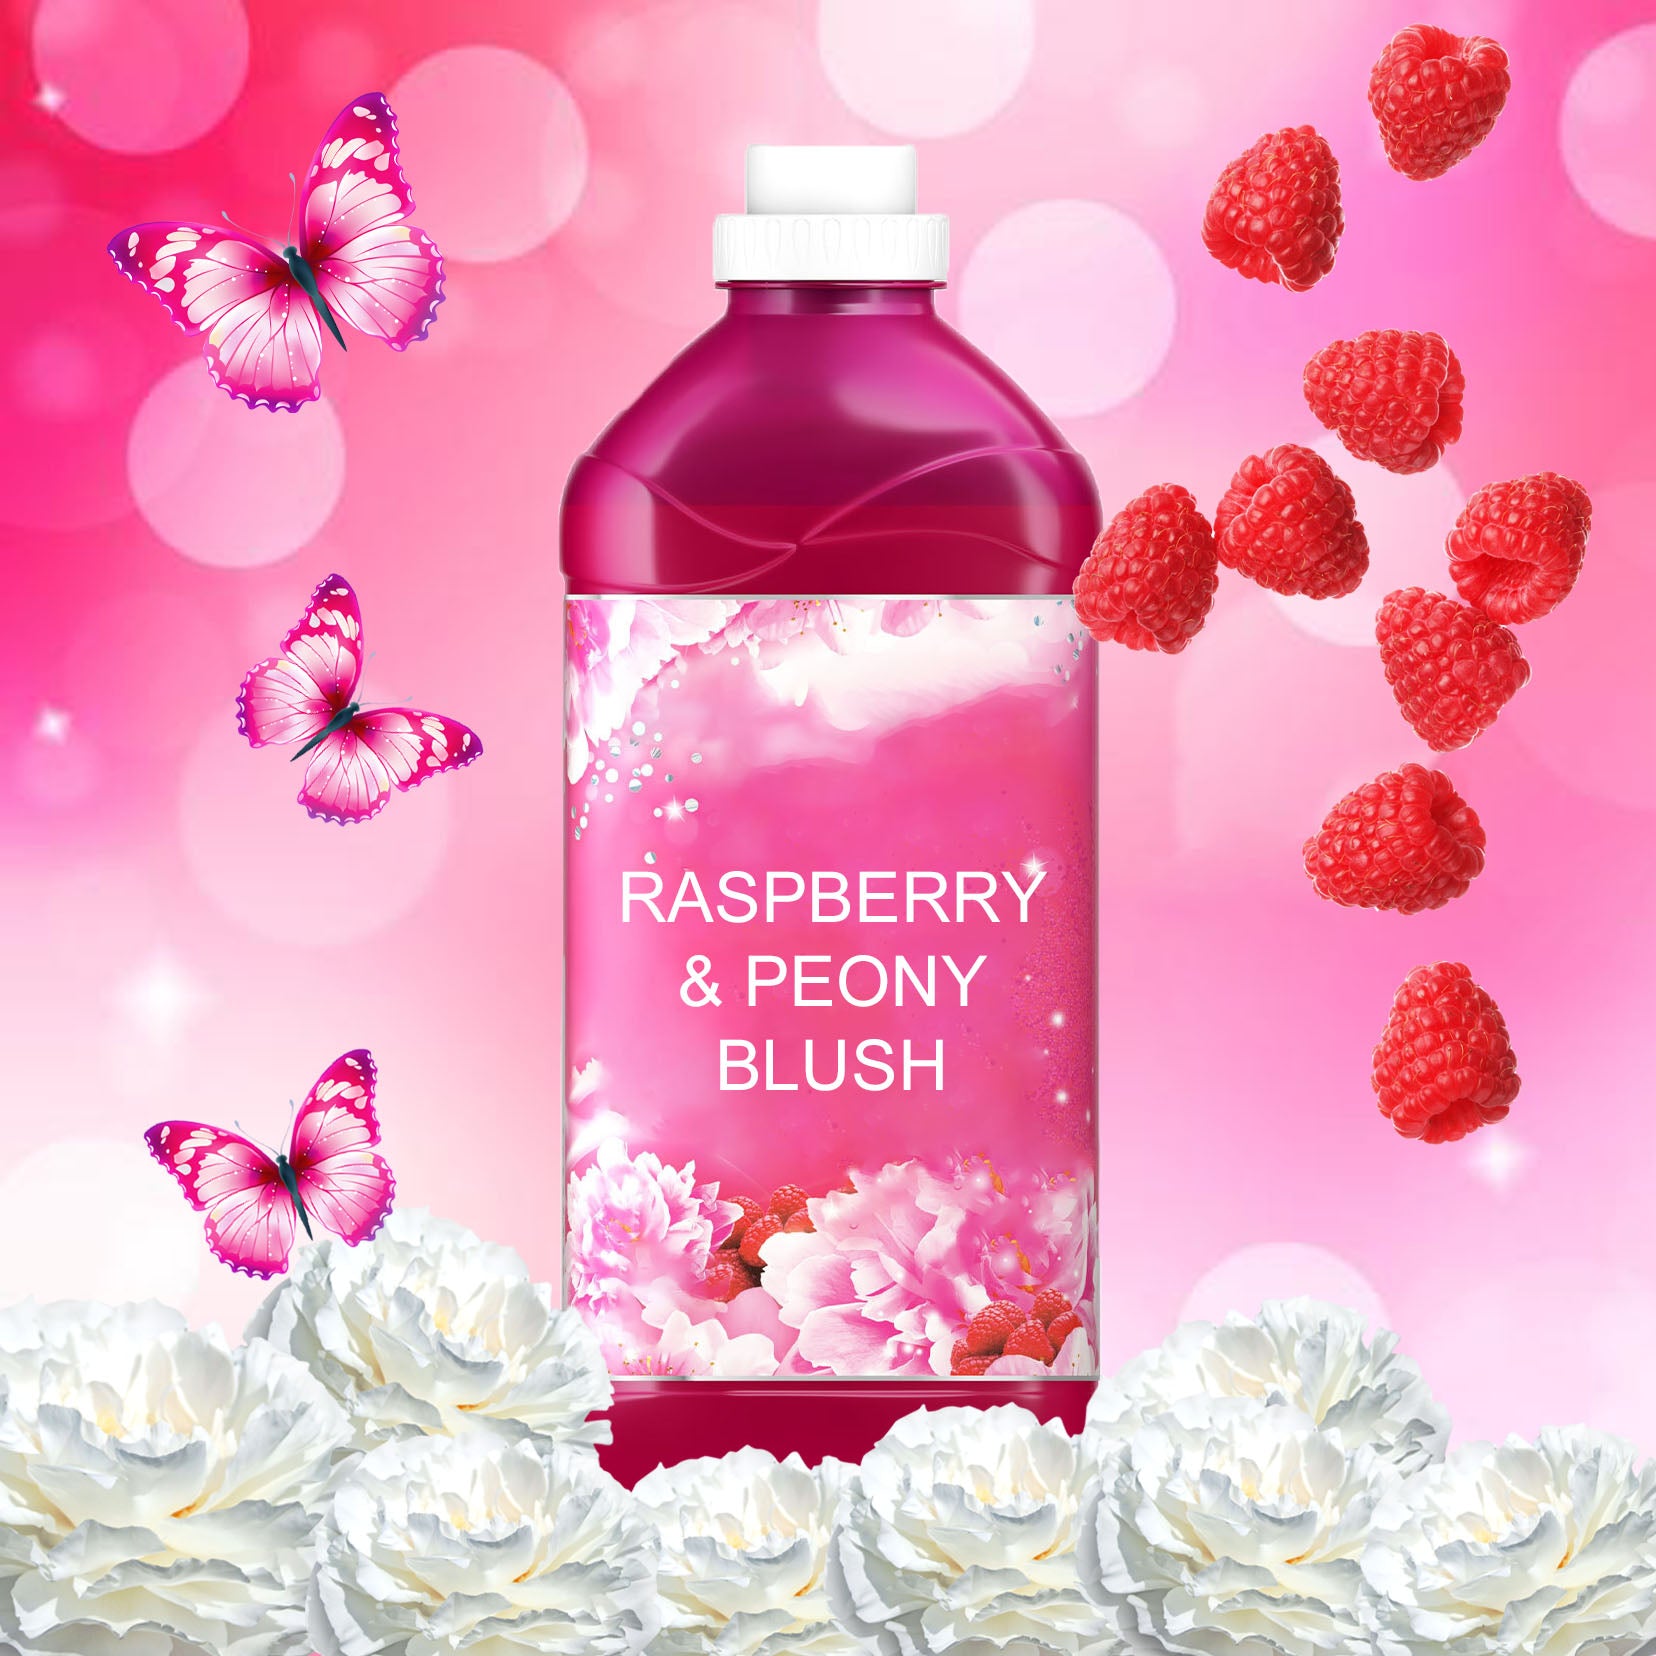 Raspberry & Peony Blush Fragrance Oil | Truly Personal | Candles, Wax Melts, Soap, Bath Bombs